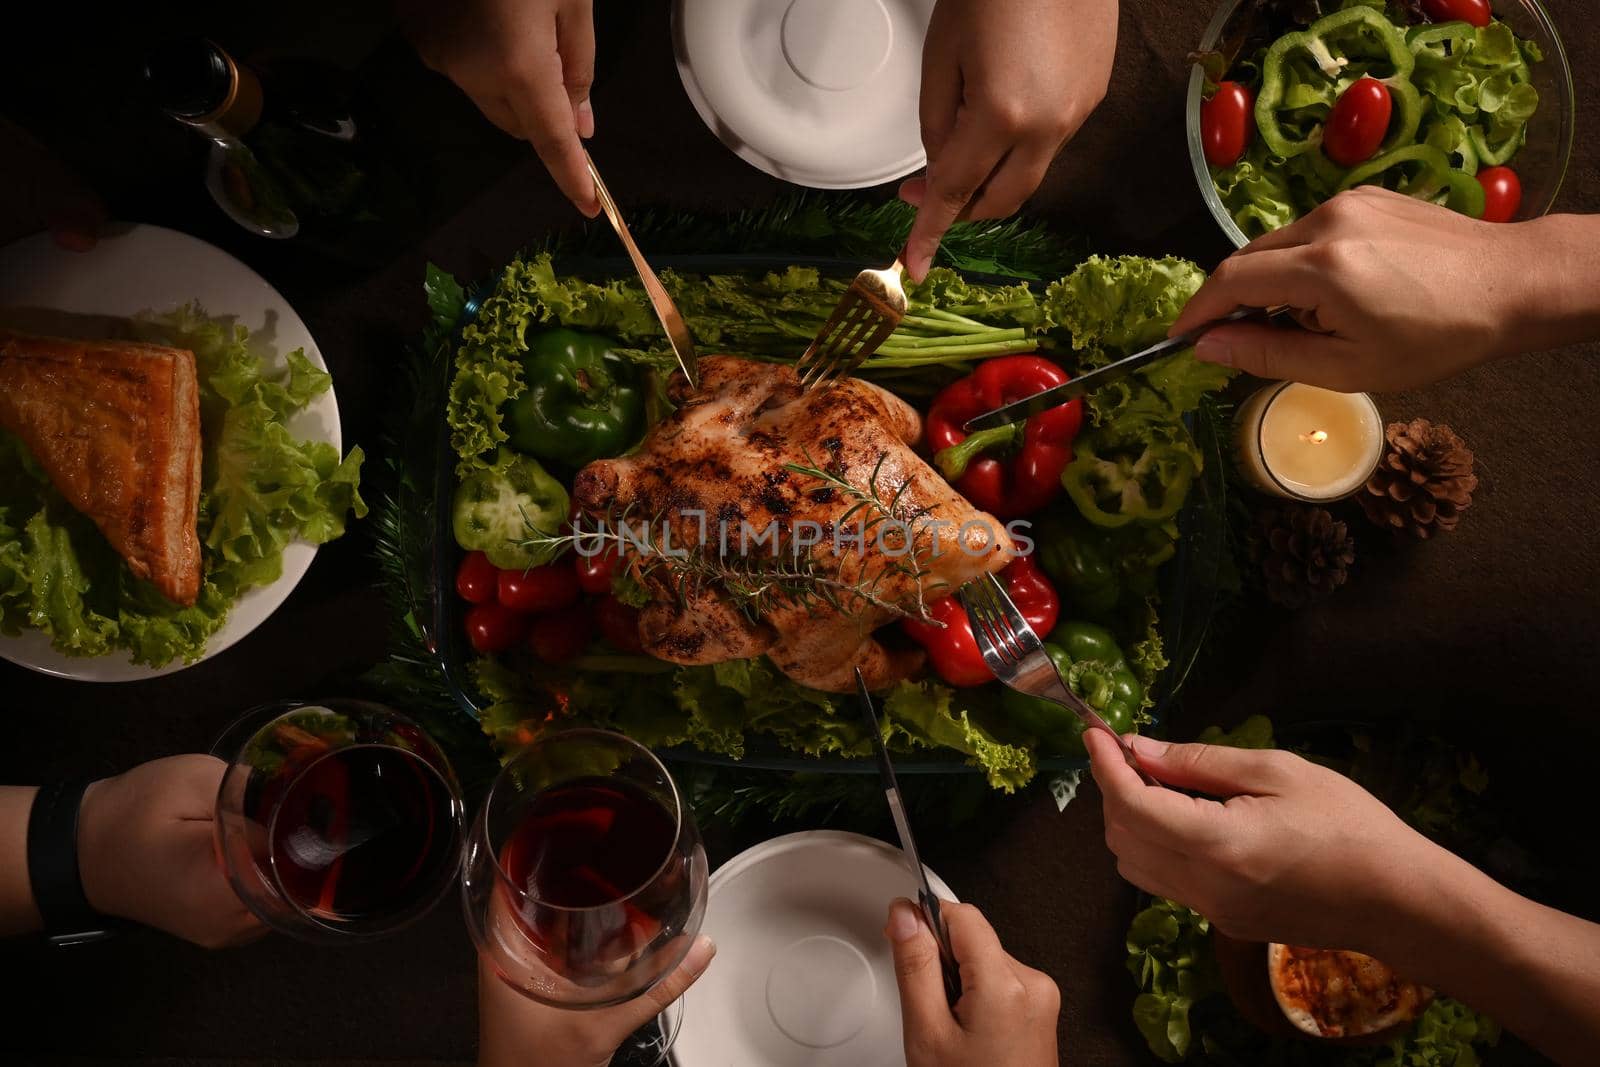 From above view group of friends or family enjoy eating roast turkey, Thanksgiving meal together. Celebration, holidays and Christmas concept by prathanchorruangsak